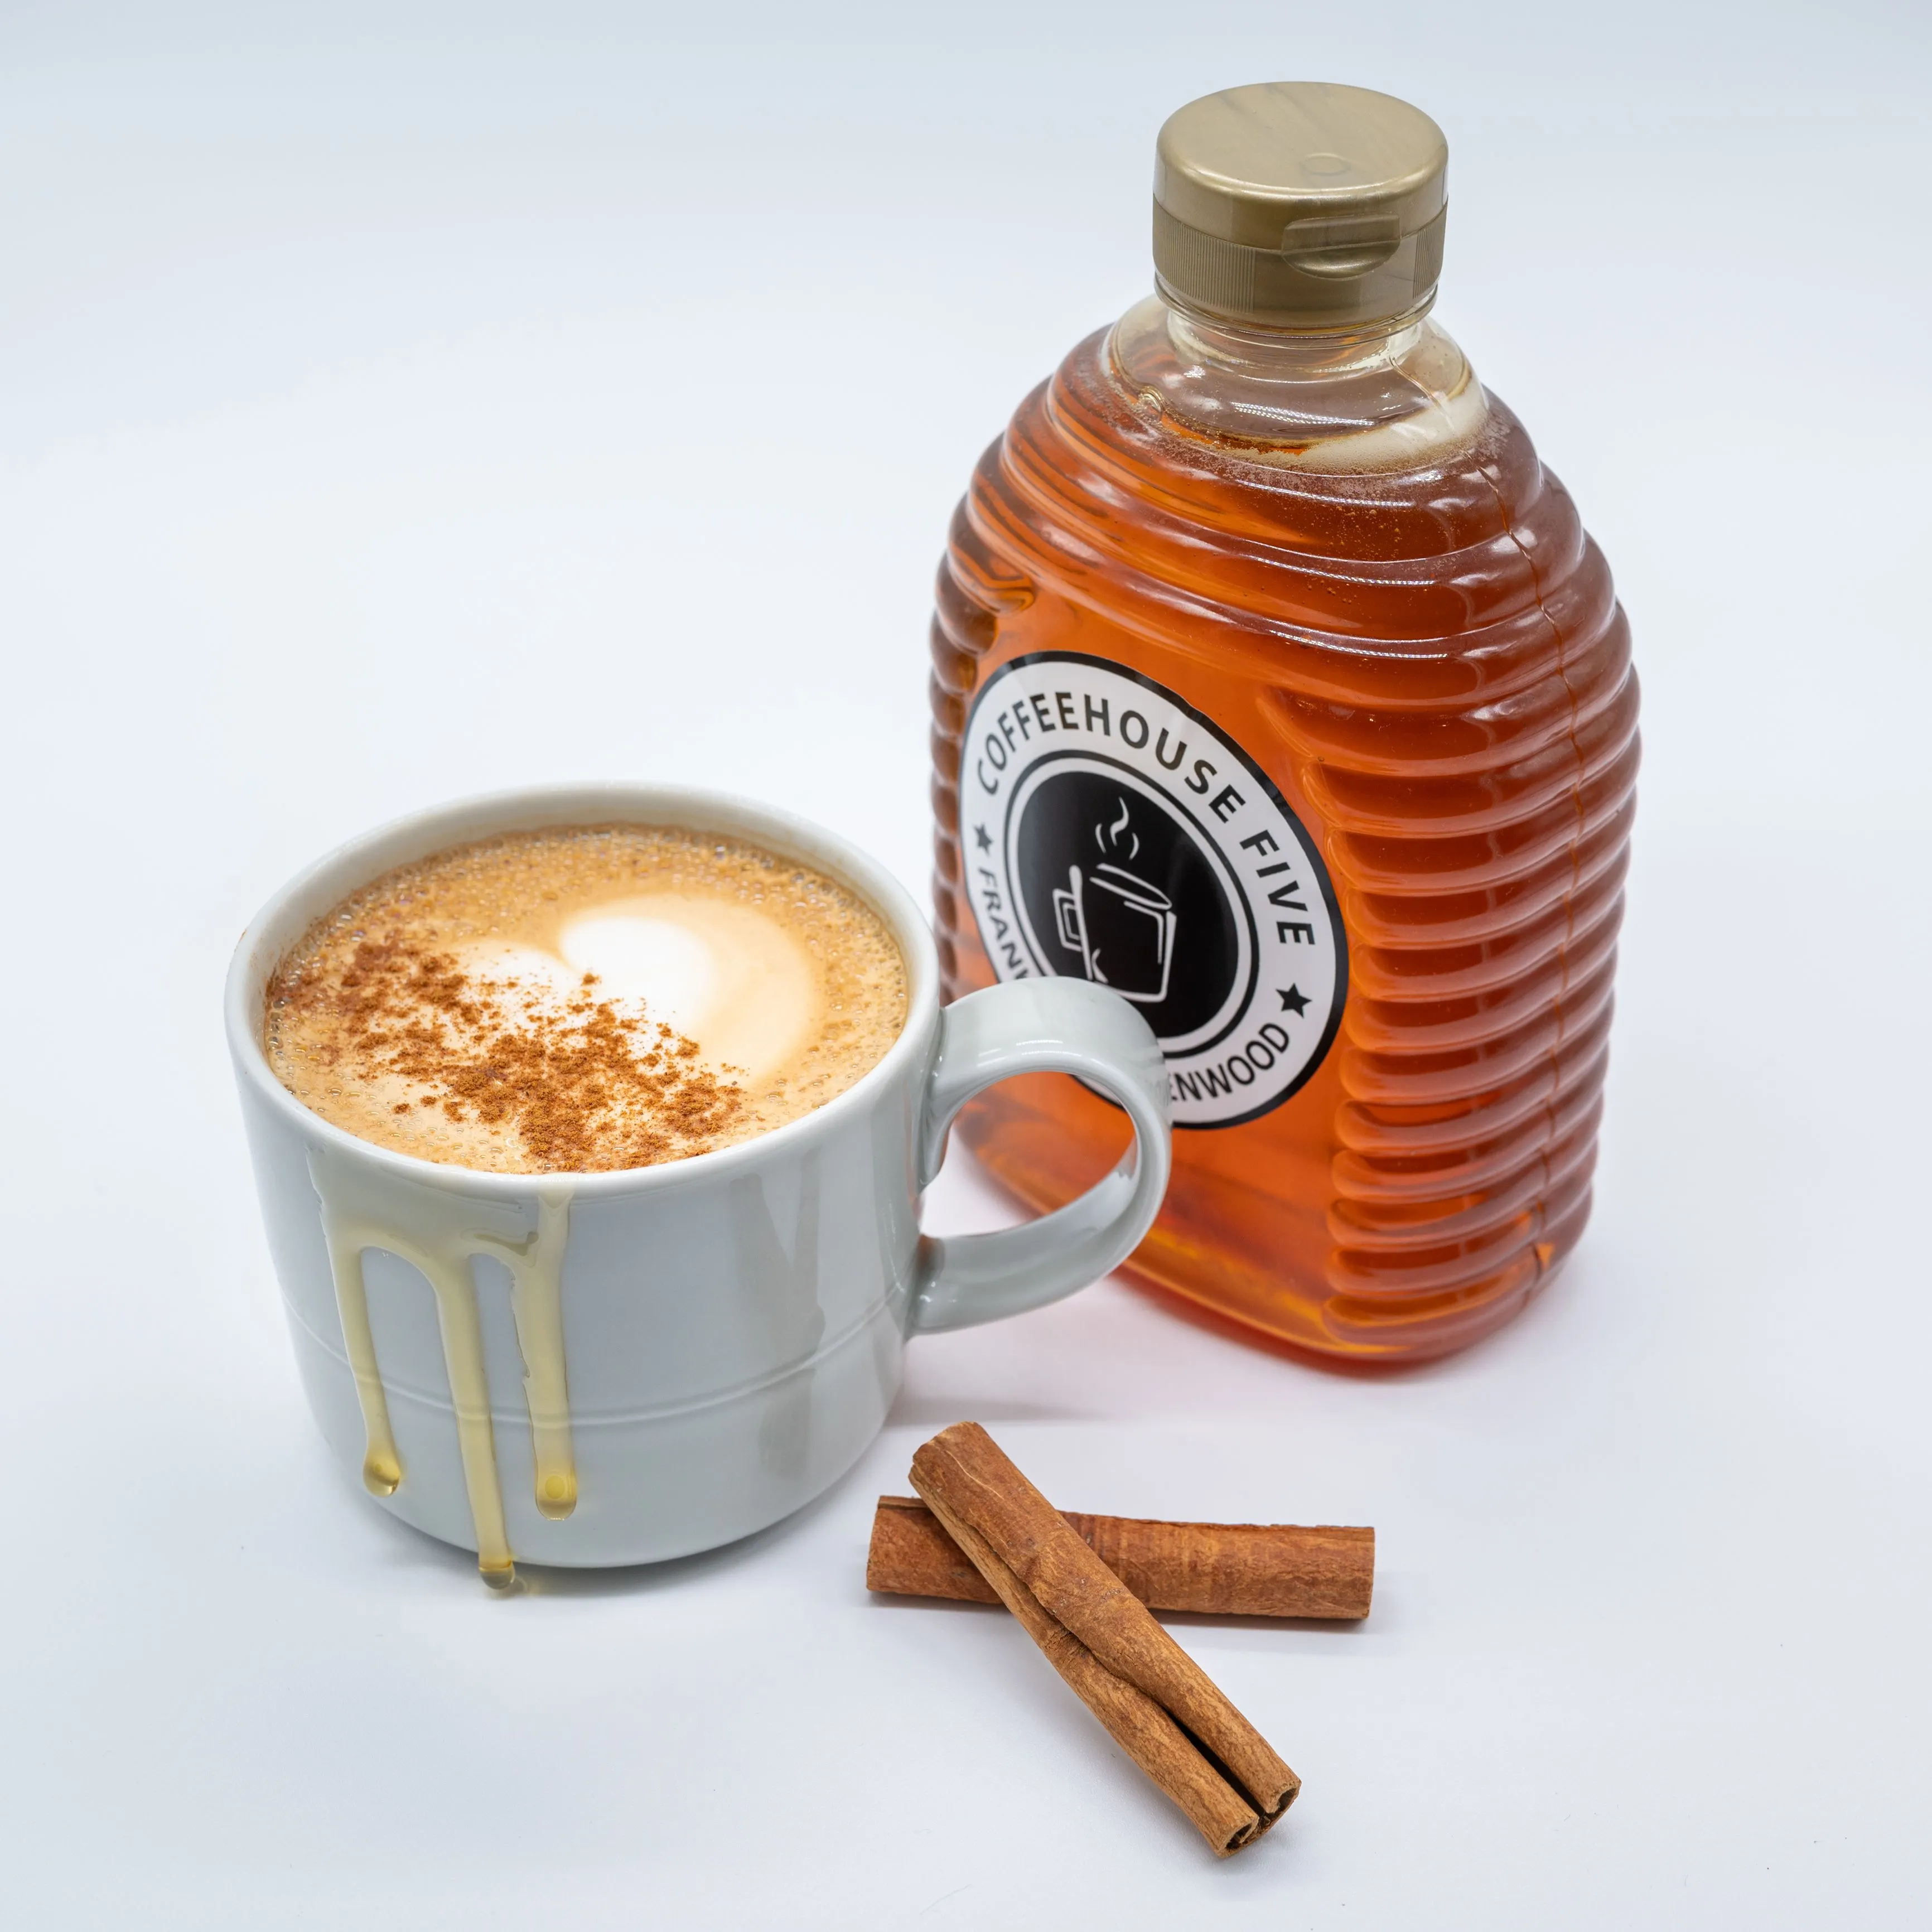 A cup of cappuccino with heart-shaped foam art next to a large bottle of Coffeehouse Five syrup and two cinnamon sticks on a white background.